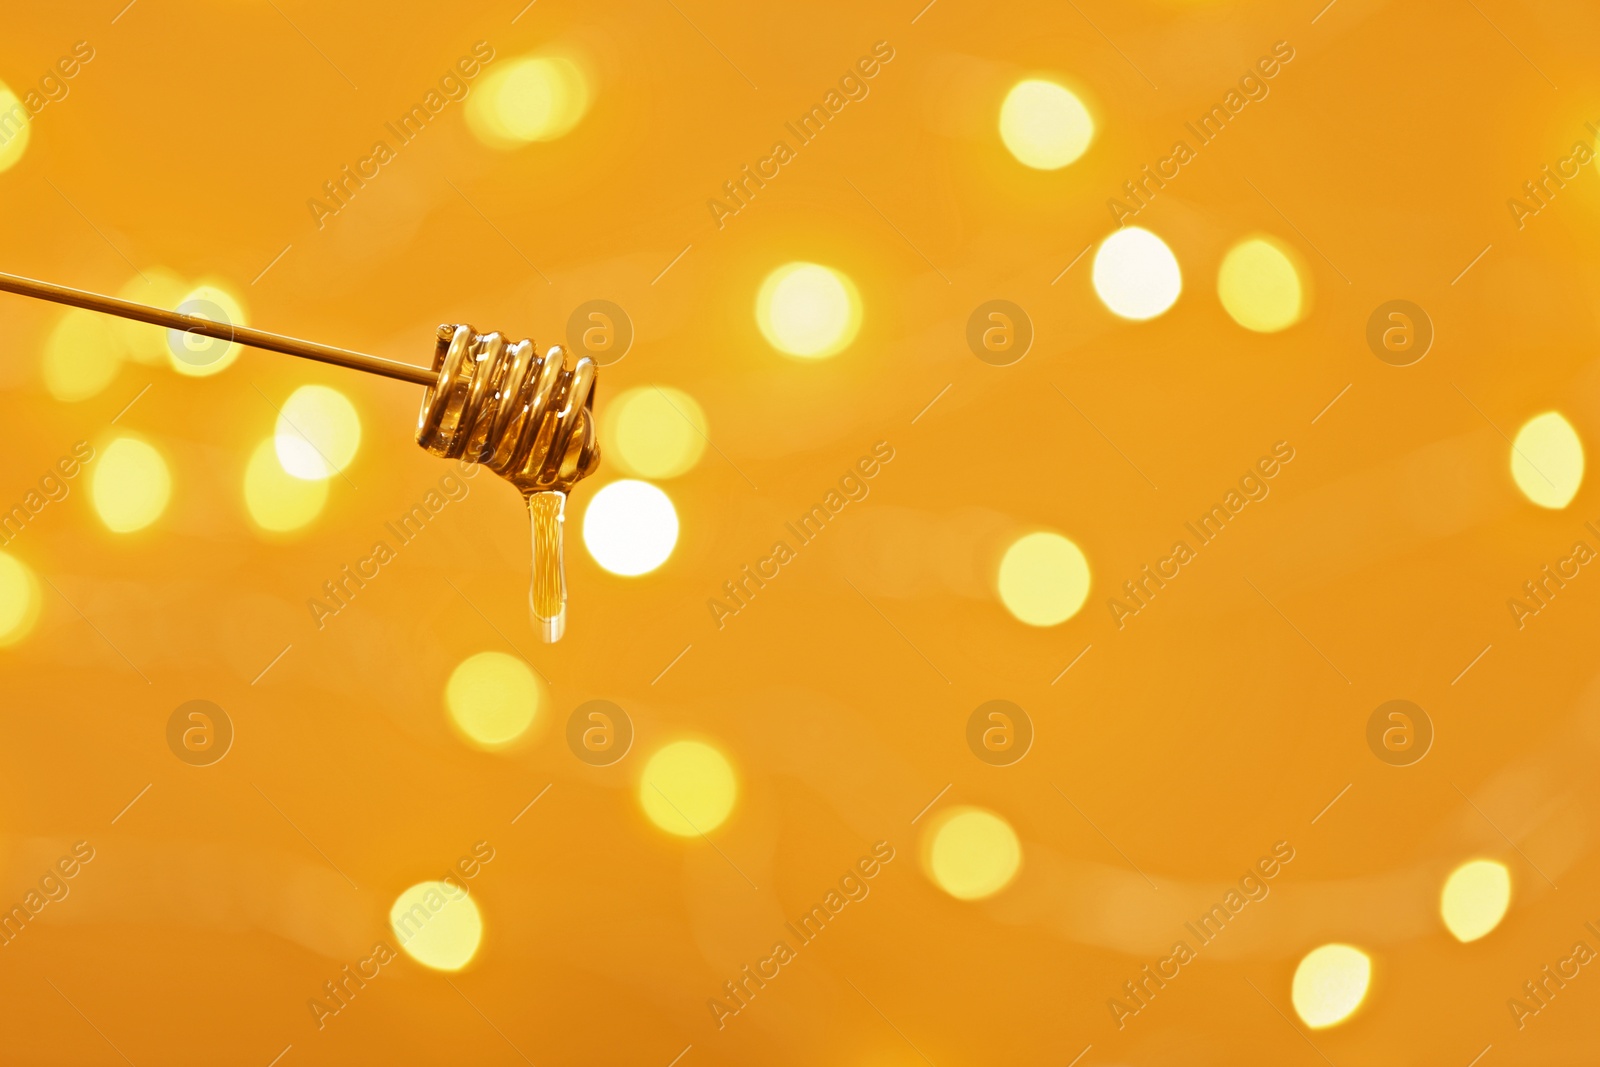 Photo of Honey dripping from dipper against blurred lights. Space for text